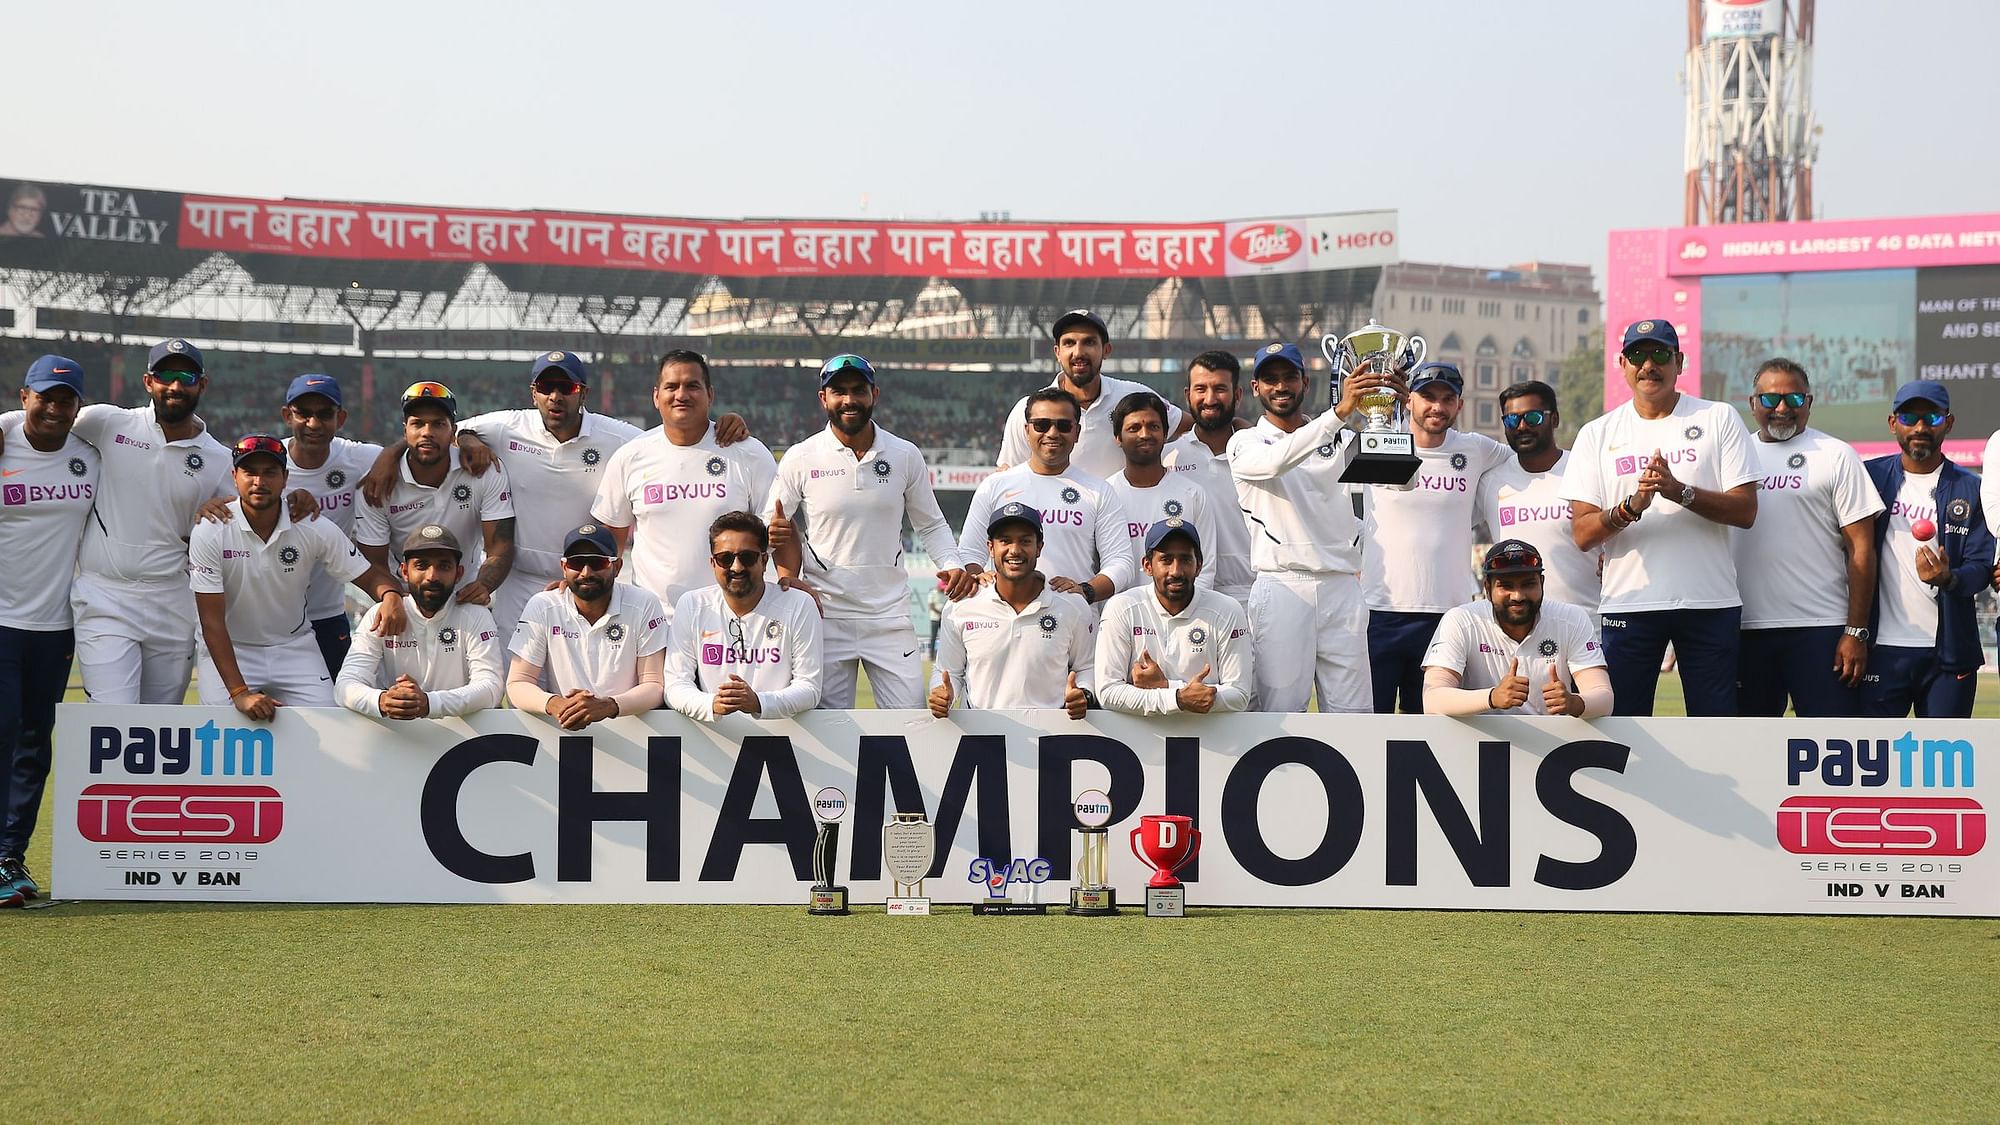 India celebrate after winning the Test series against Bangladesh, on day 3 of the 2nd Test match  held at the Eden Gardens Stadium, Kolkata on the 24th November 2019.